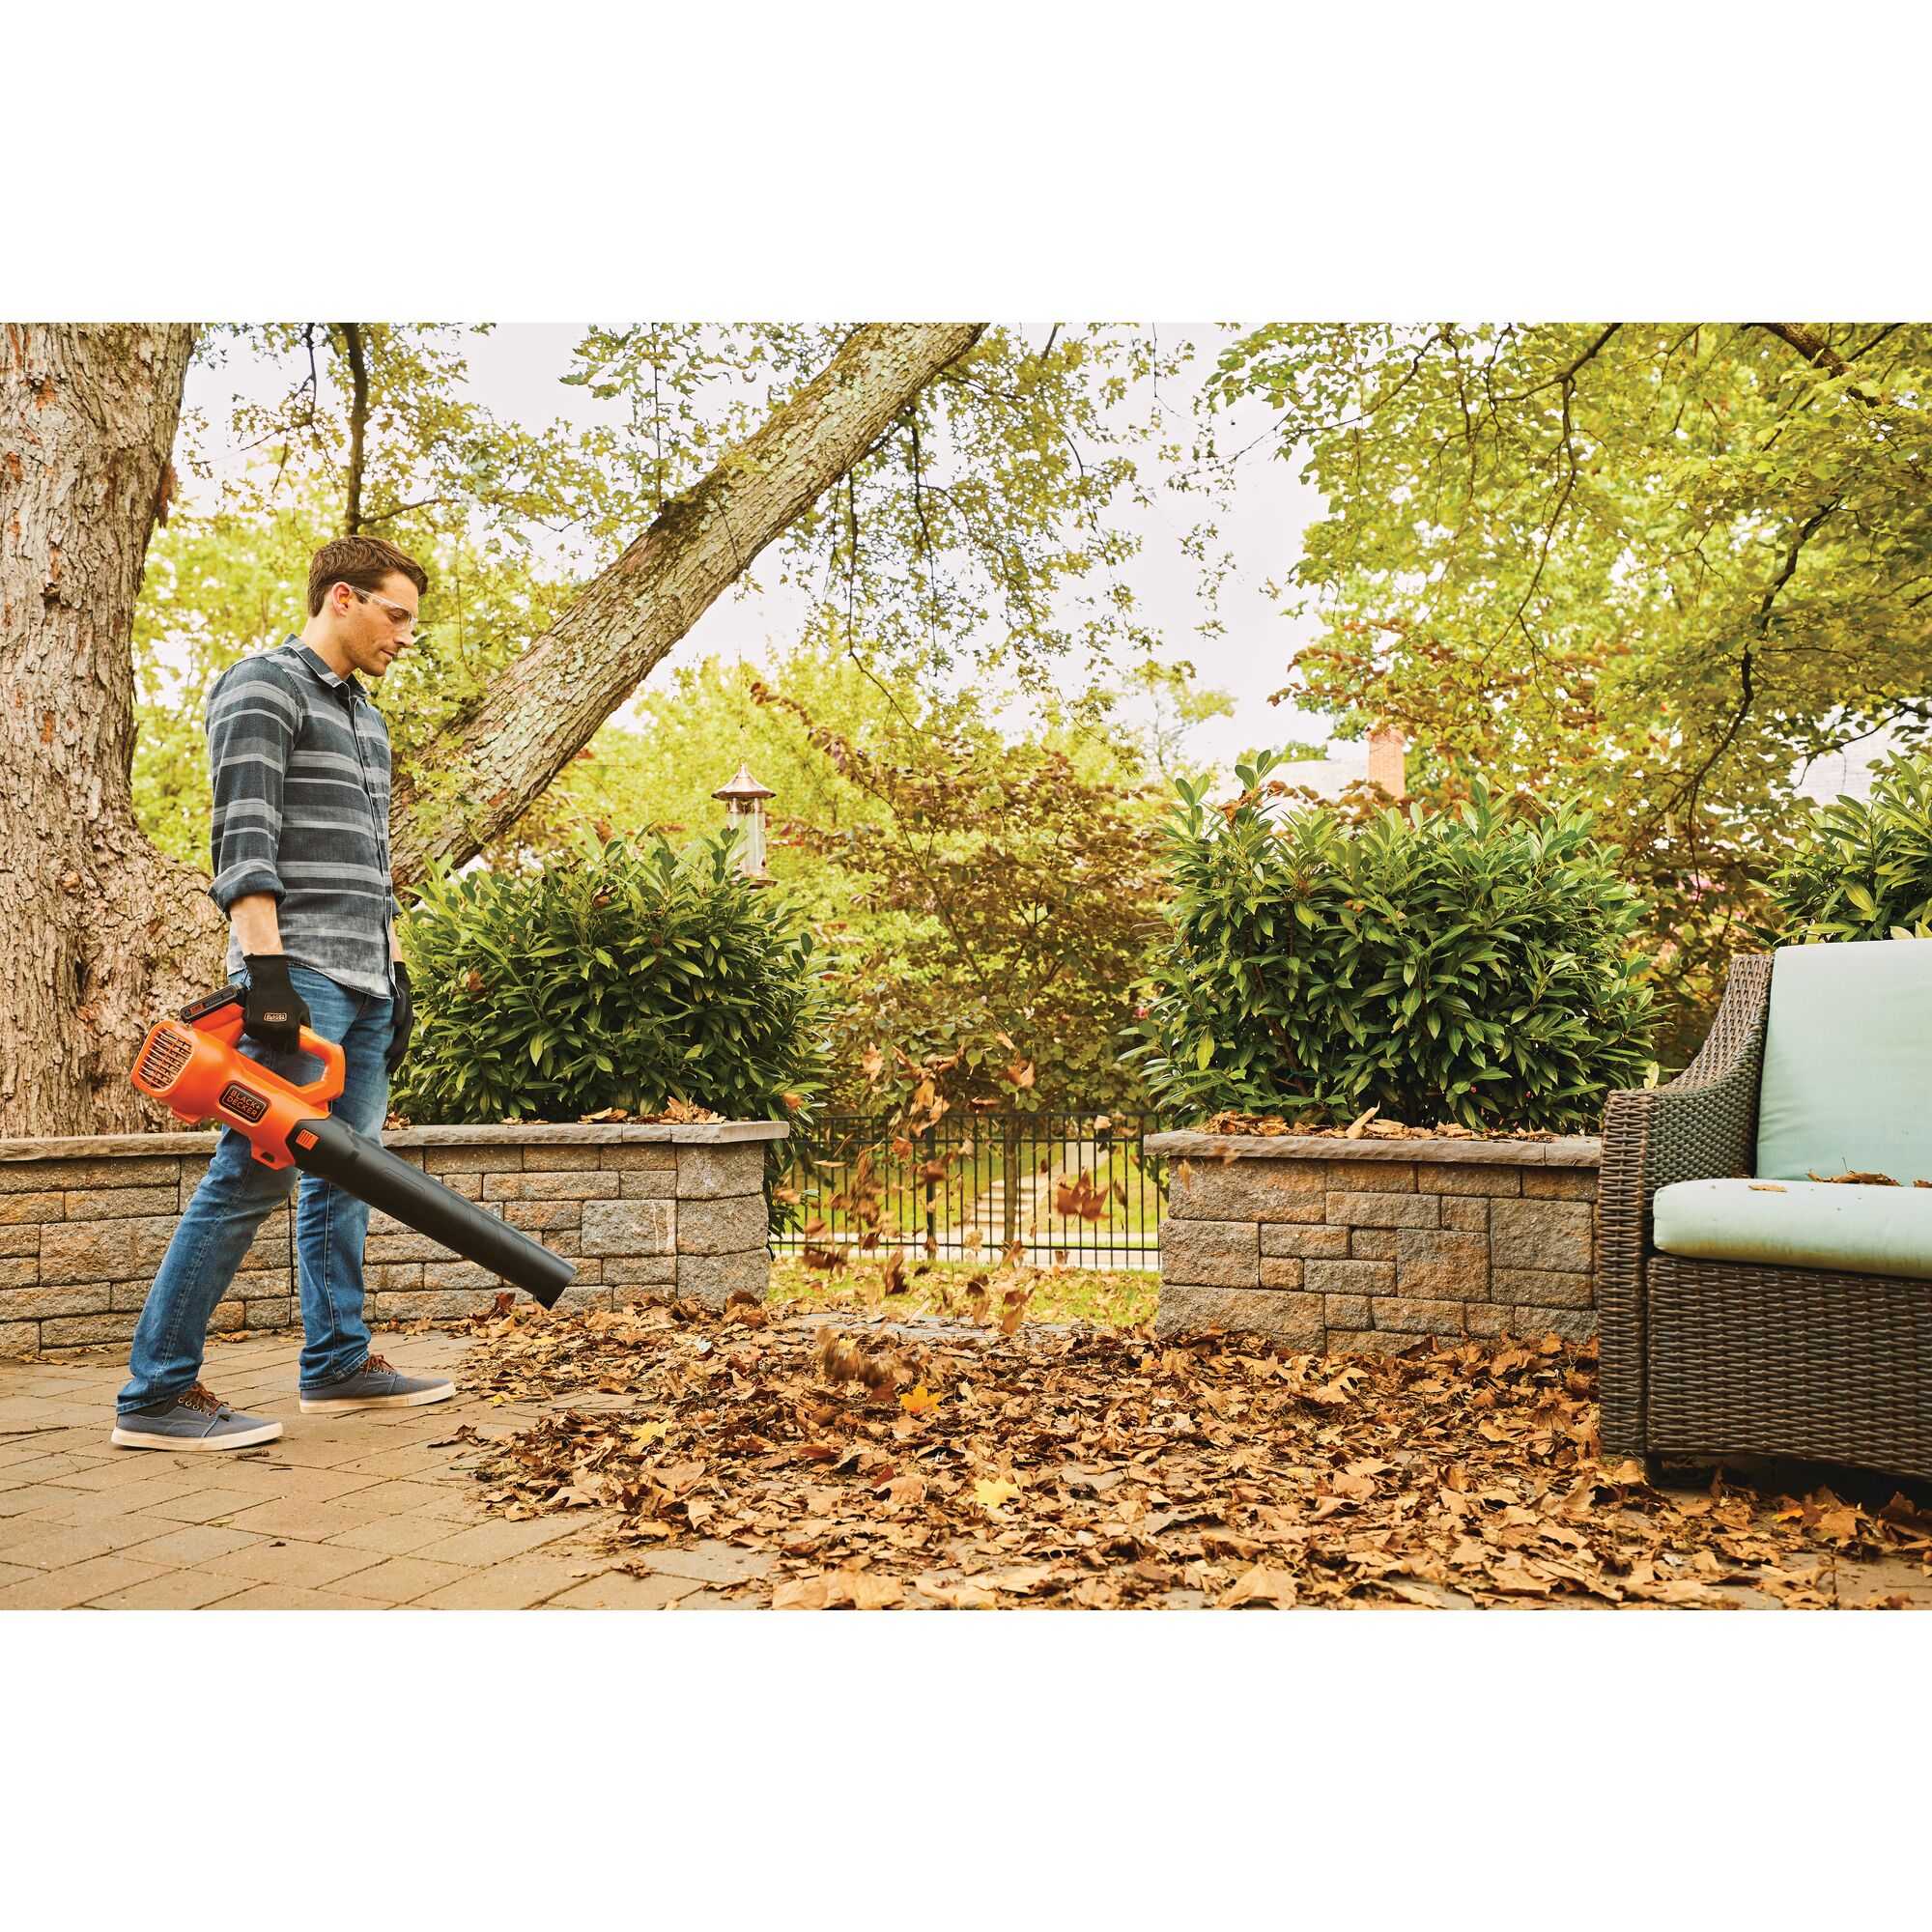 Axial Leaf Blower being used for blowing away dead leaves by person.